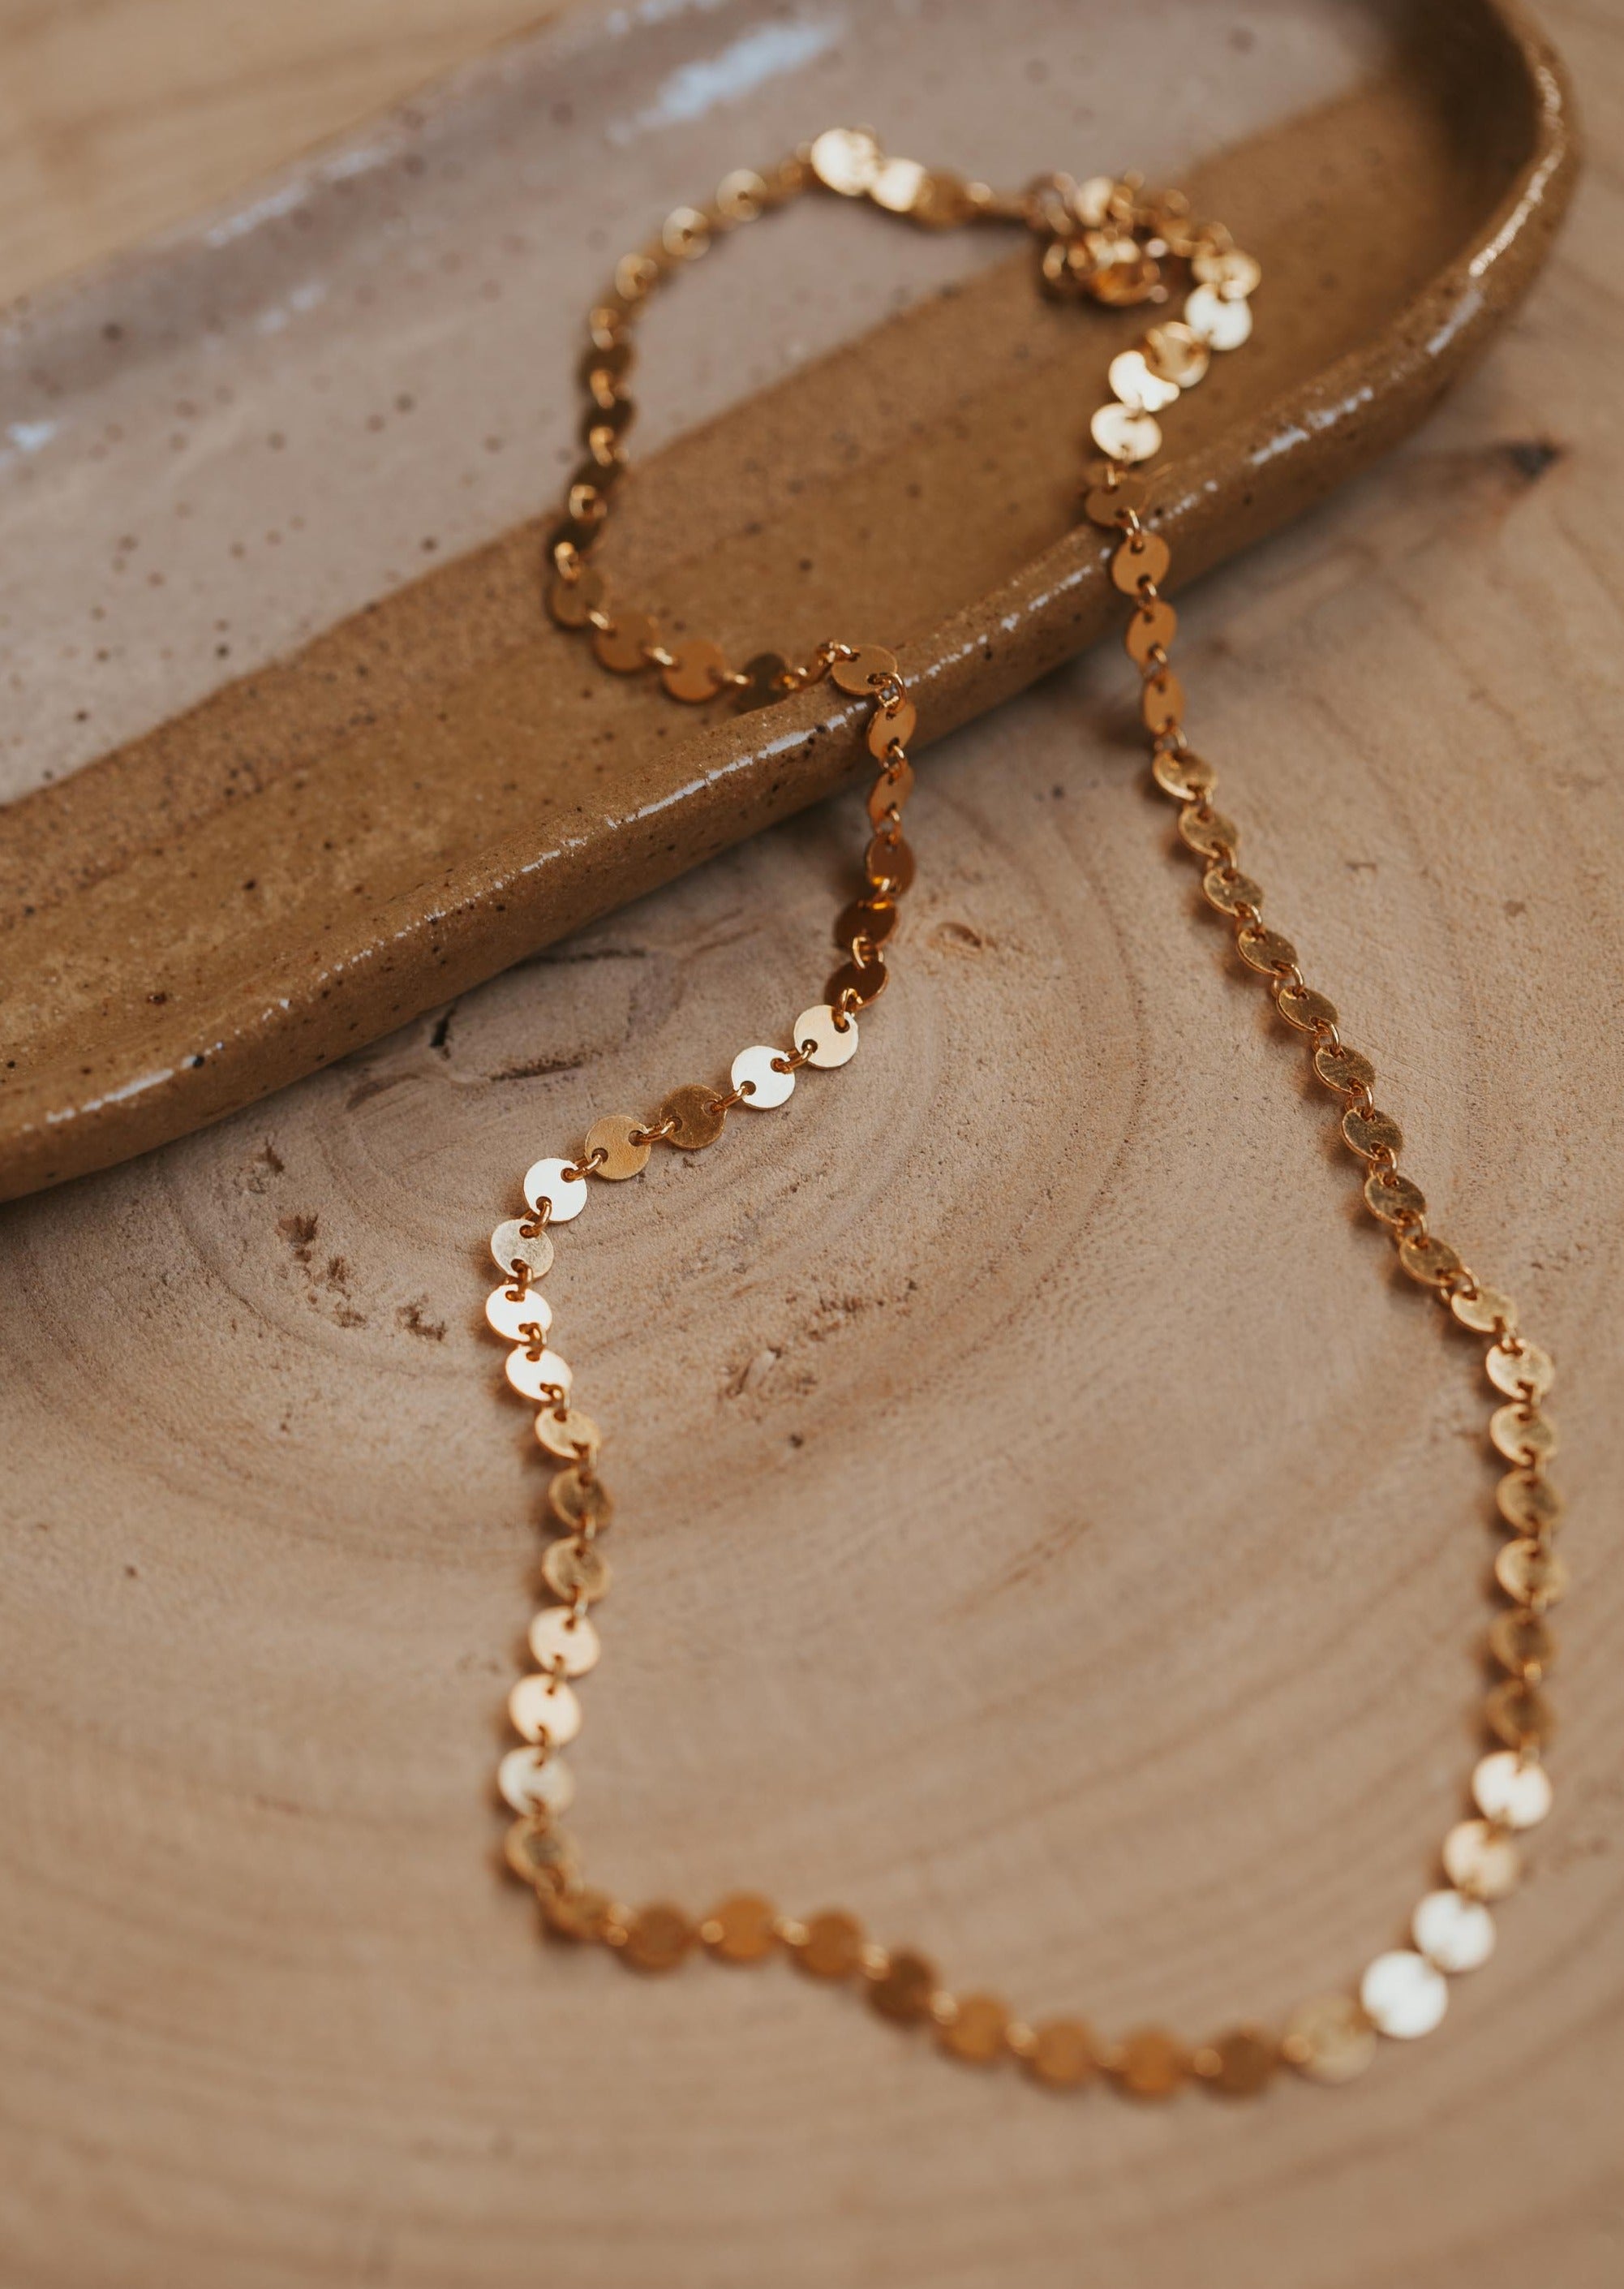 Extender Chain, 14kt Gold Fill / Lobster by Hello Adorn